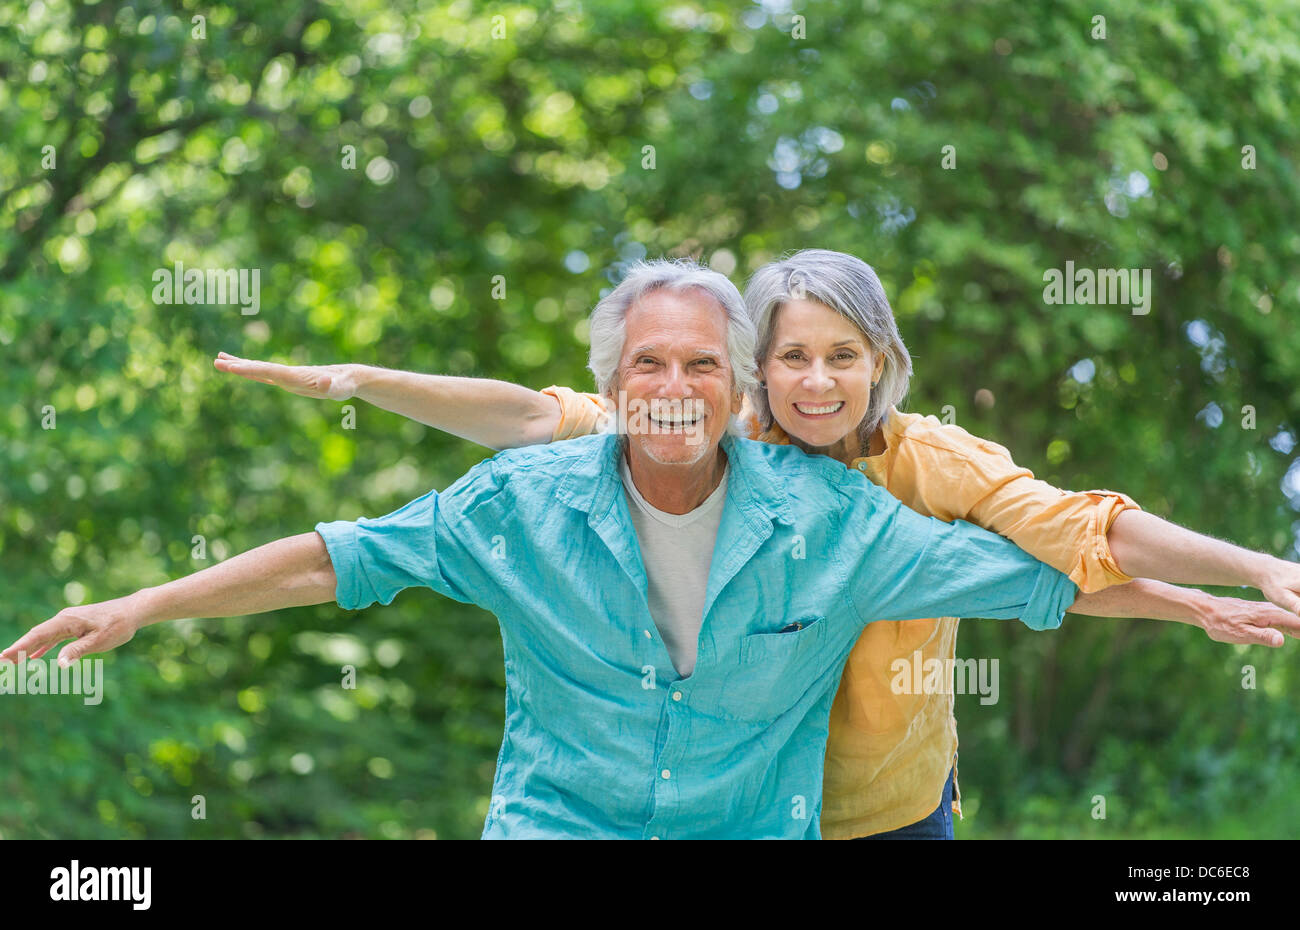 USA, New York, New York, Central Park, Senior couple having fun in park Banque D'Images